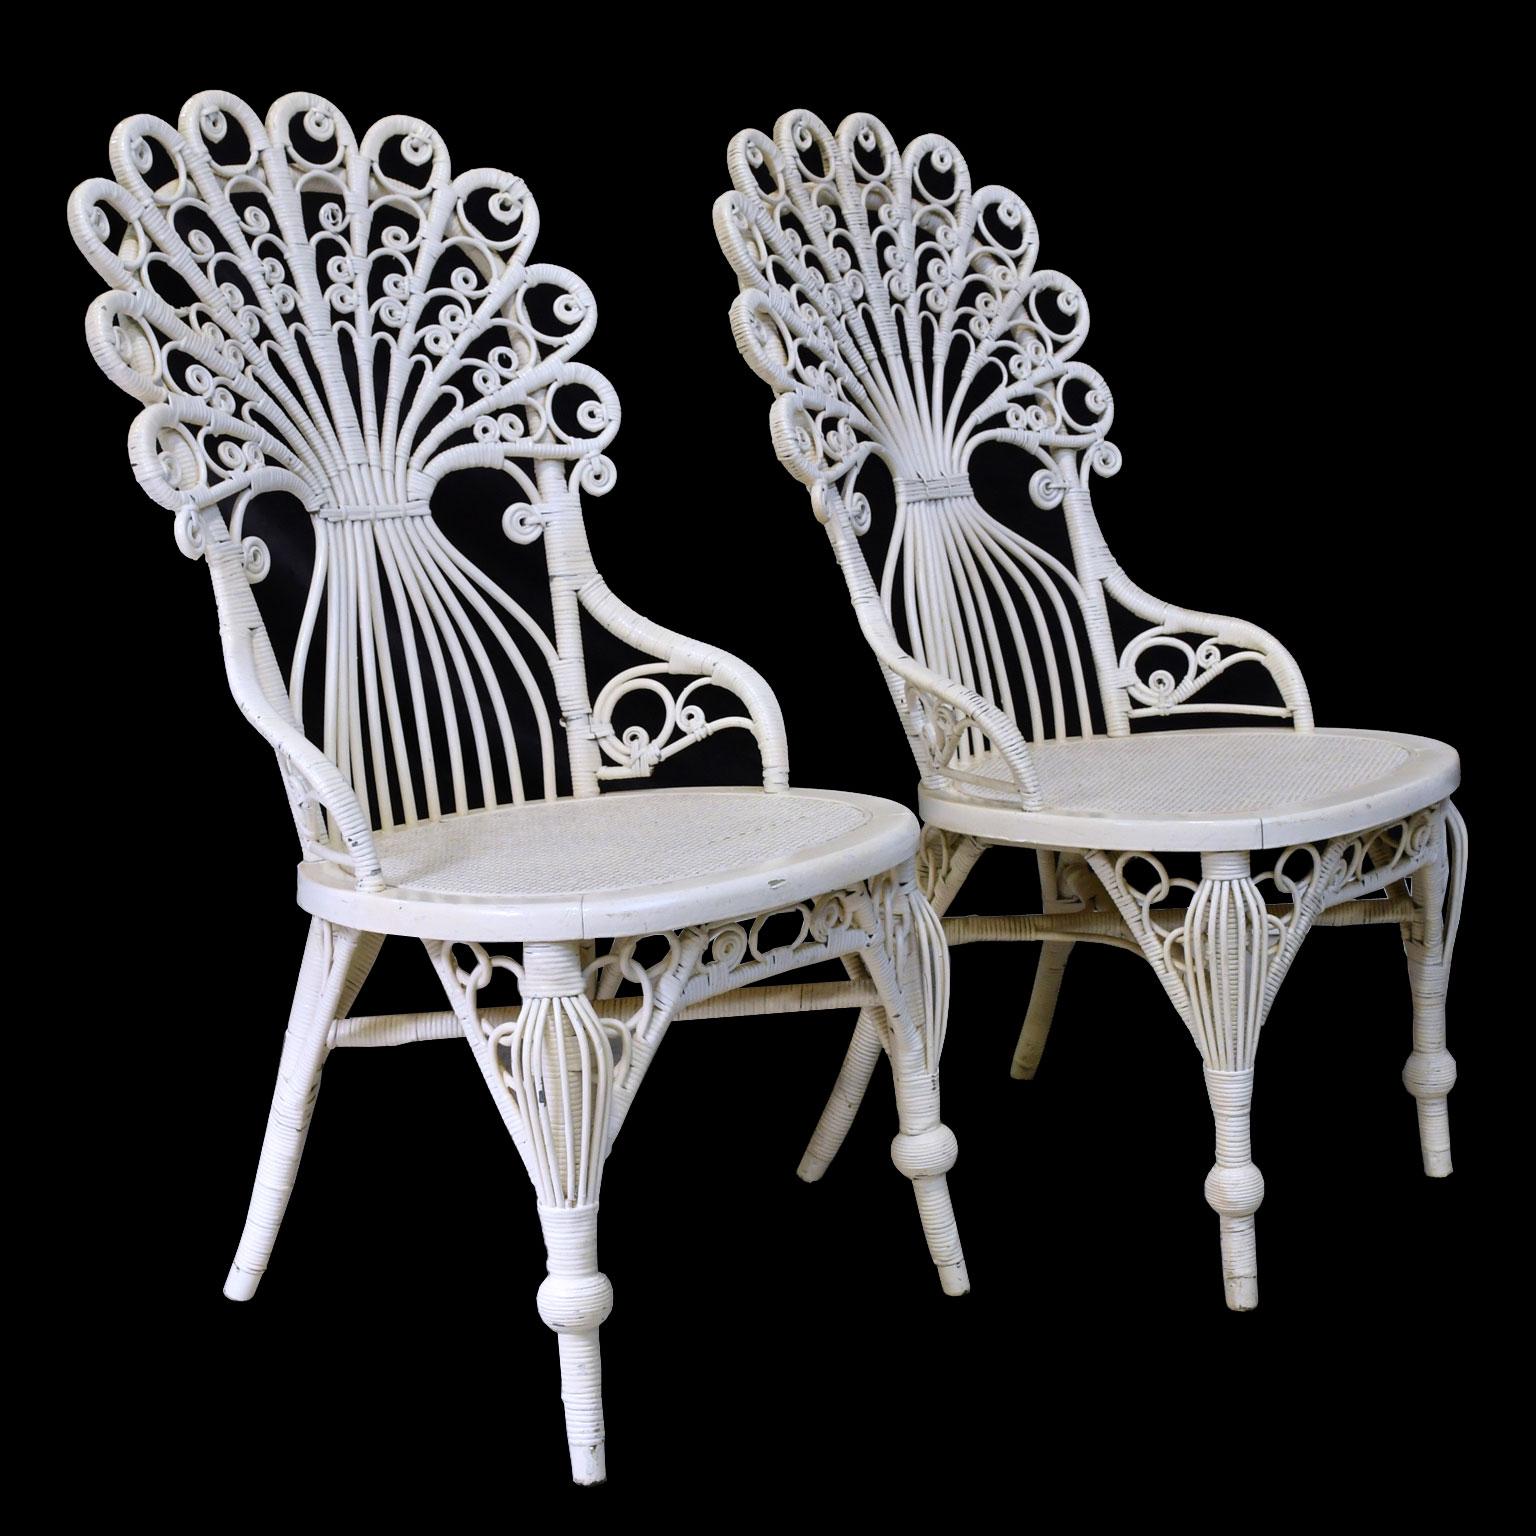 Hand-Woven Pair of Victorian Wicker Peacock Chairs, American, circa 1880